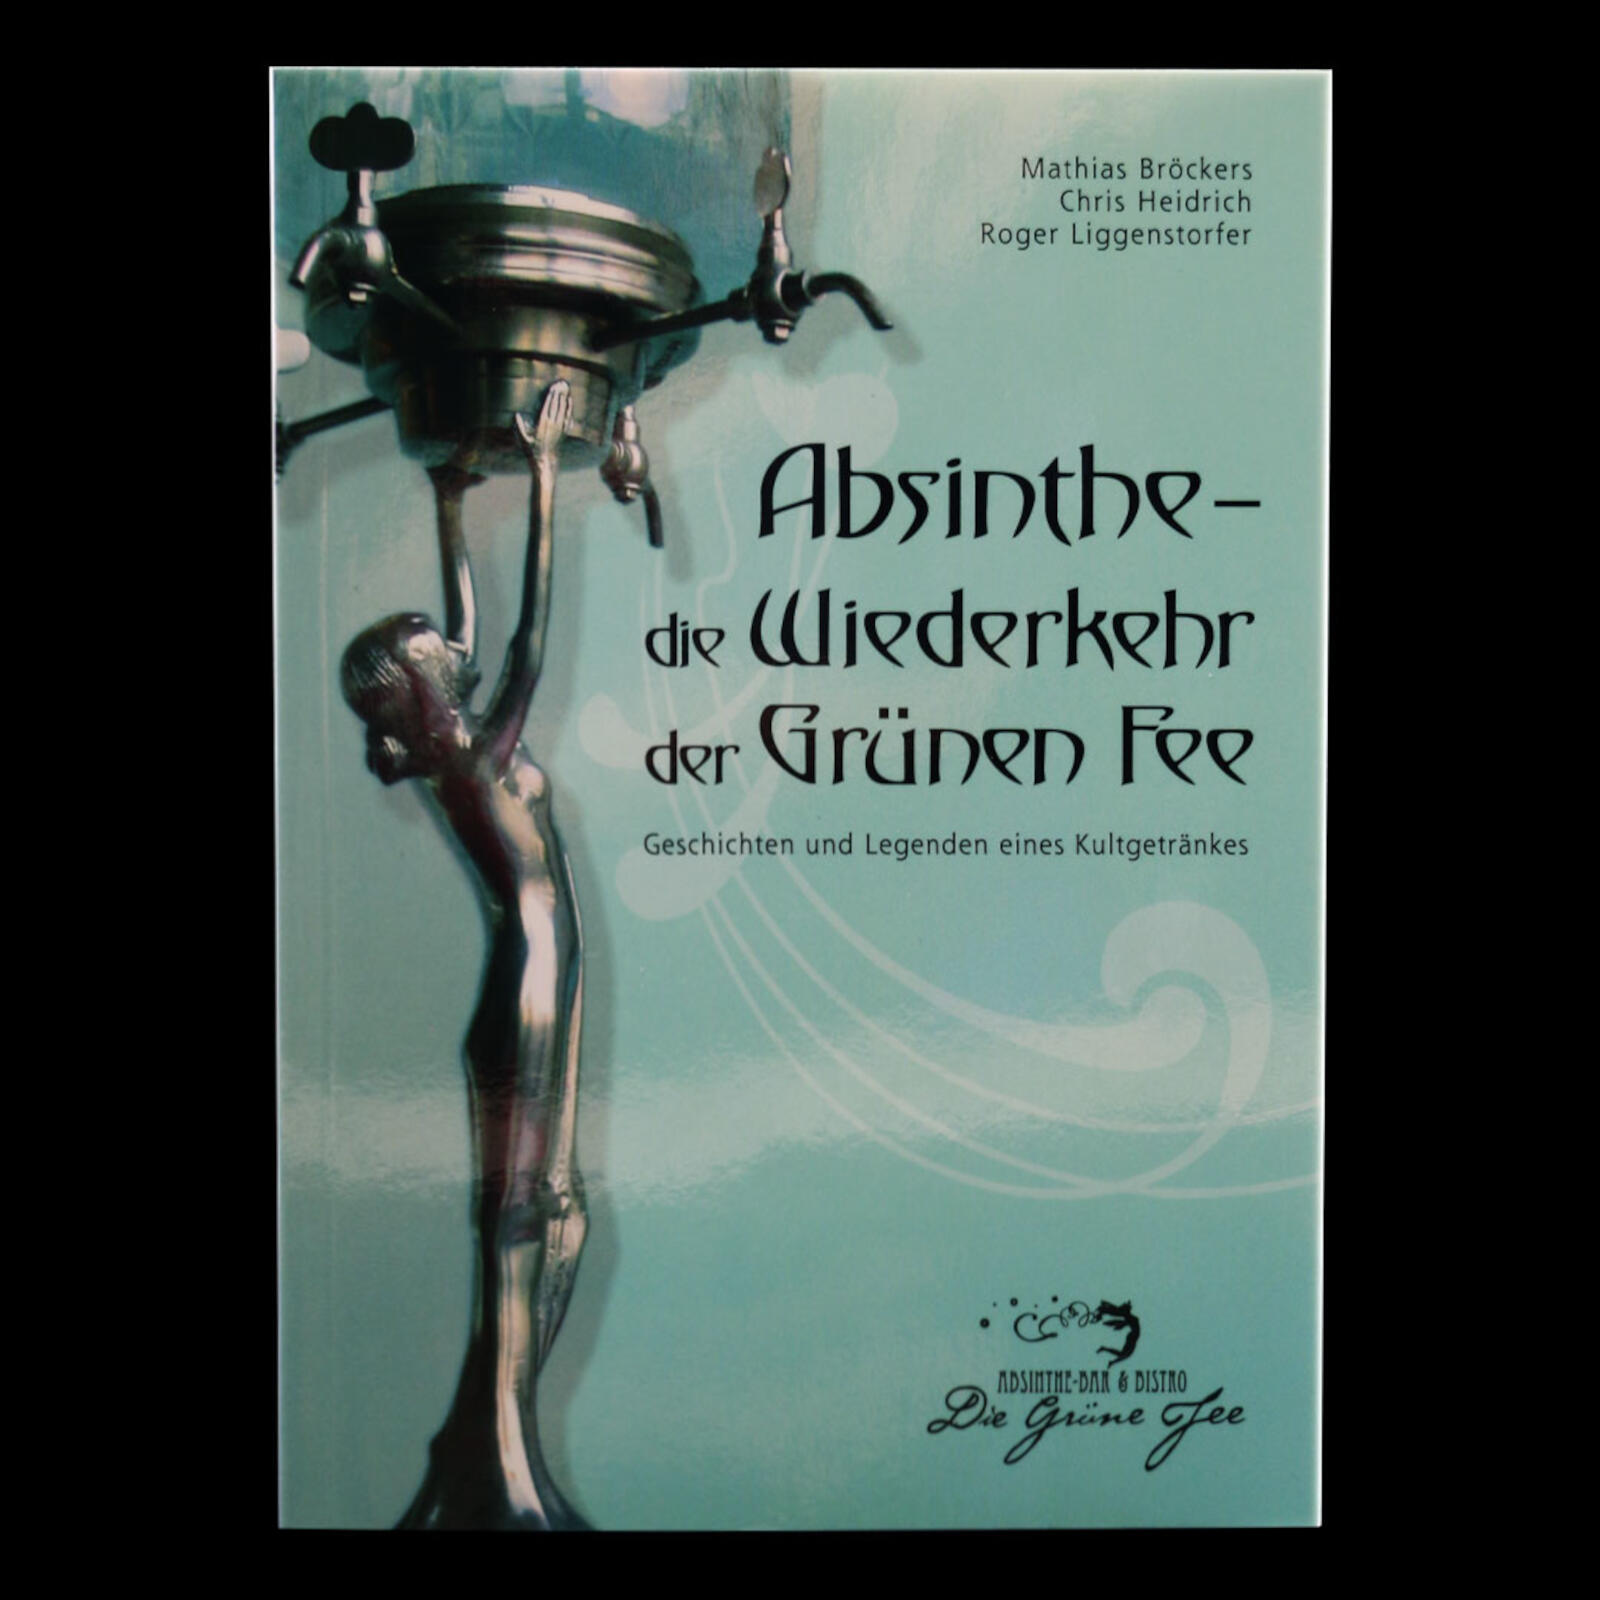 Absinthe - the return of the Green Fairy